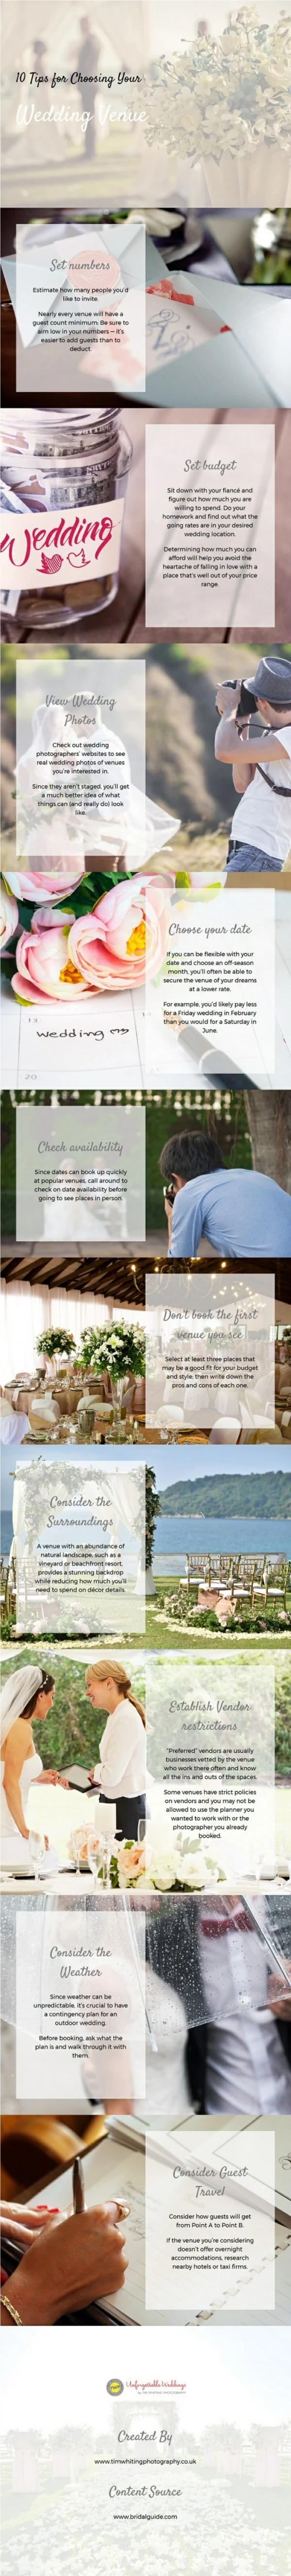 10 Tips for Choosing Your Wedding Venue